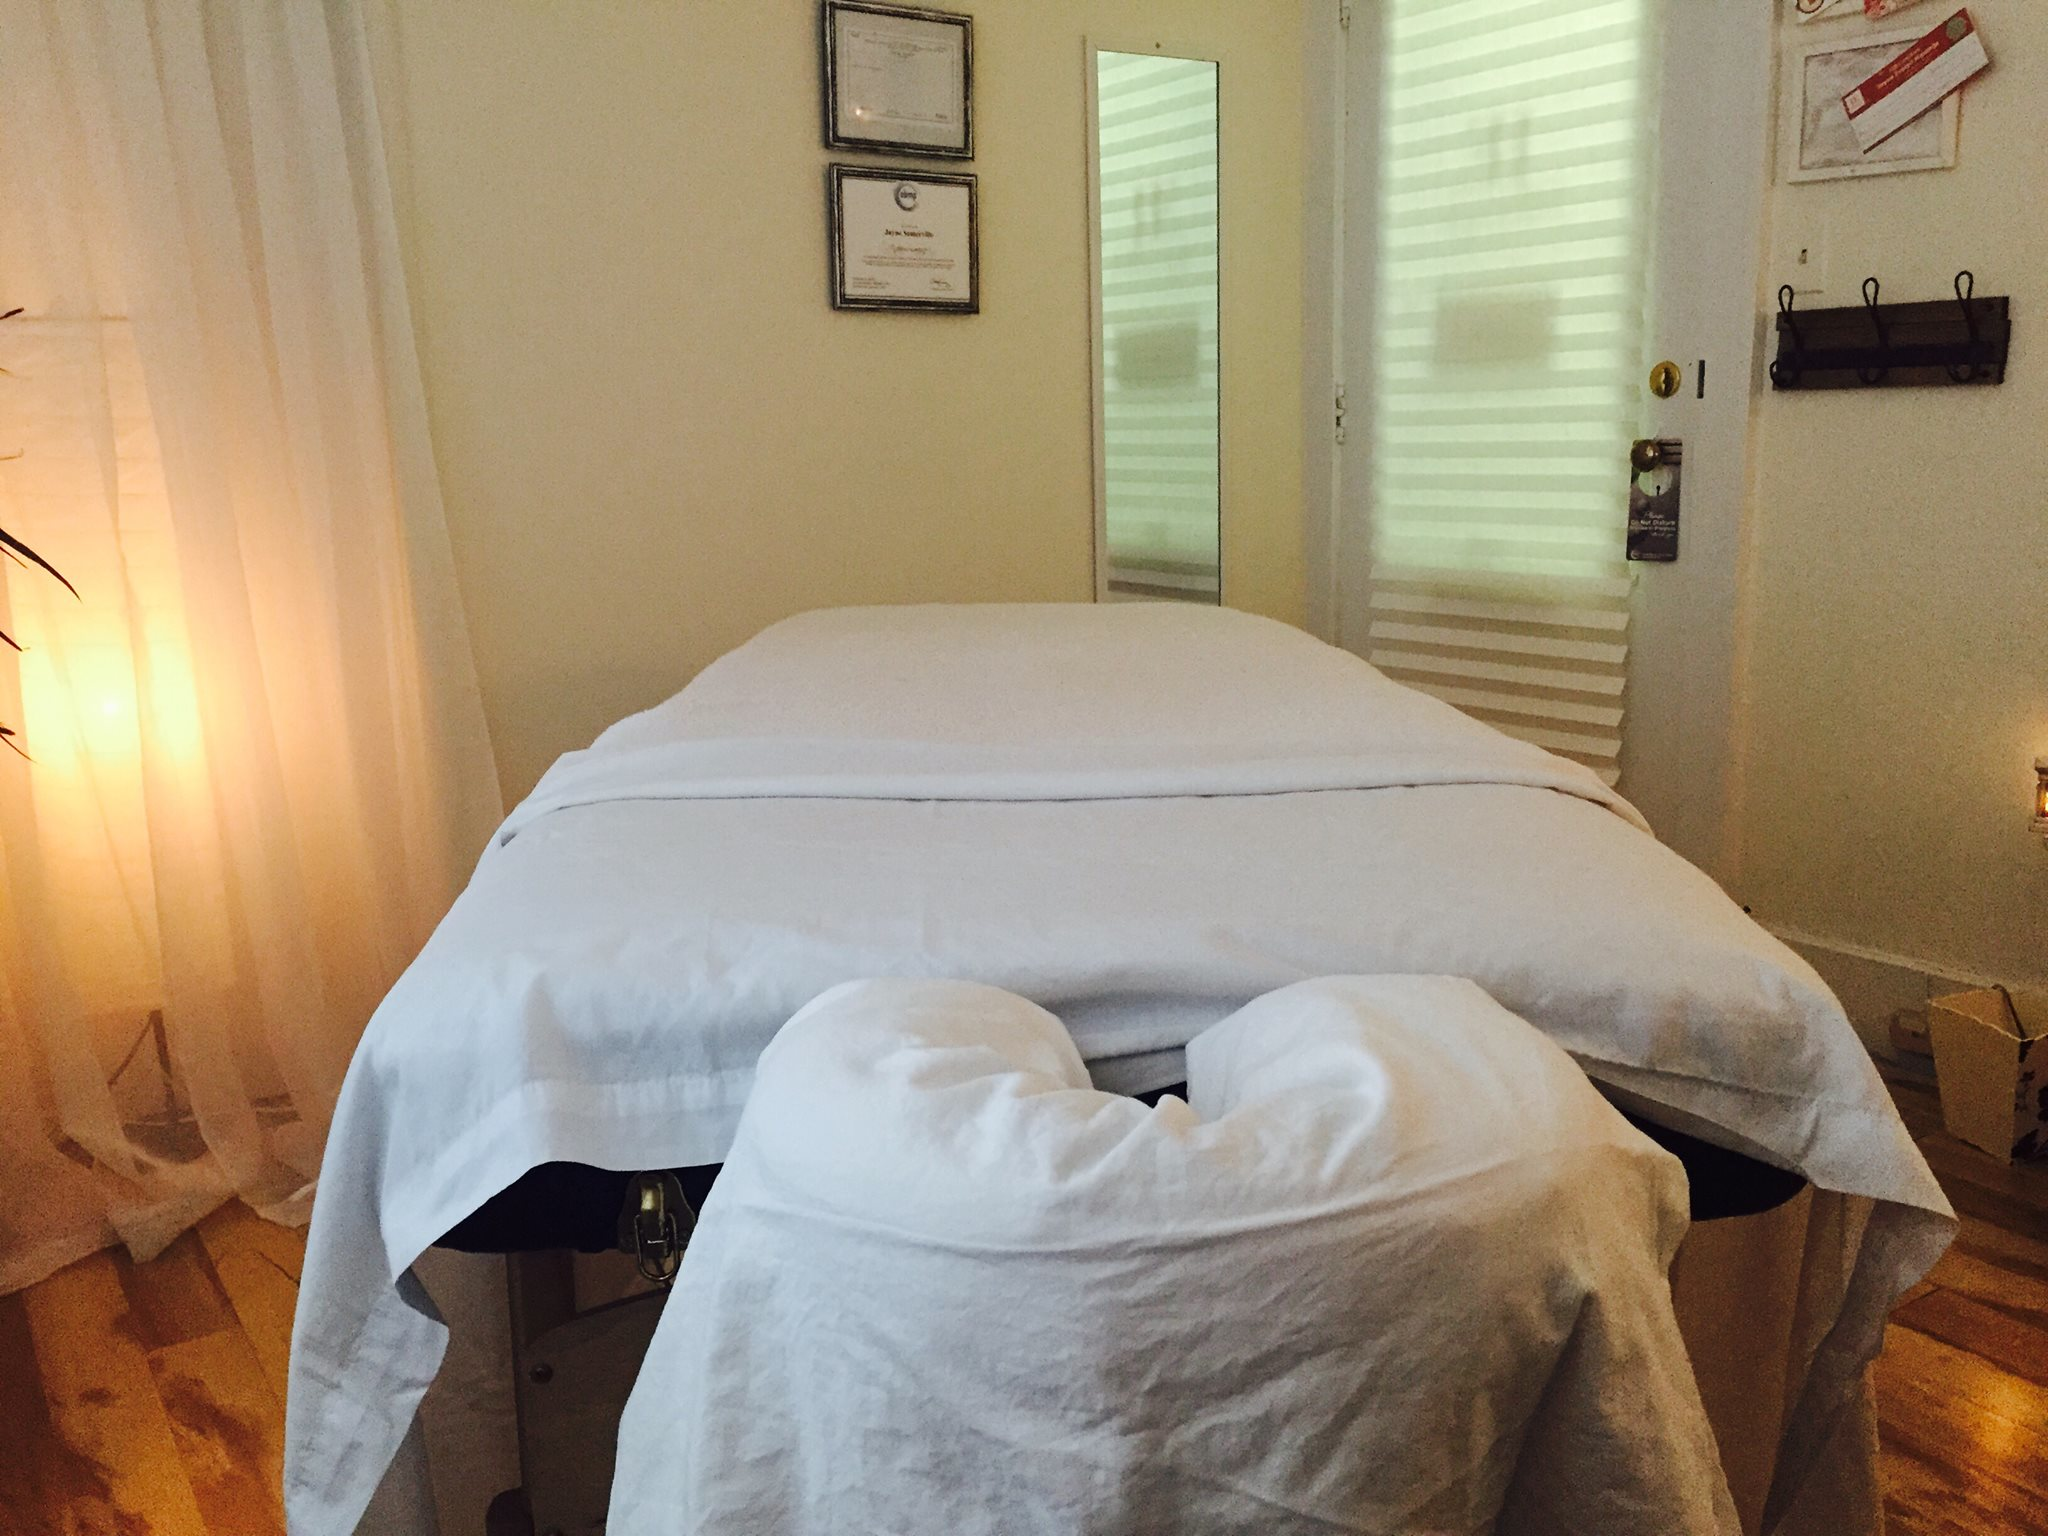 What To Expect From Your Massage Session